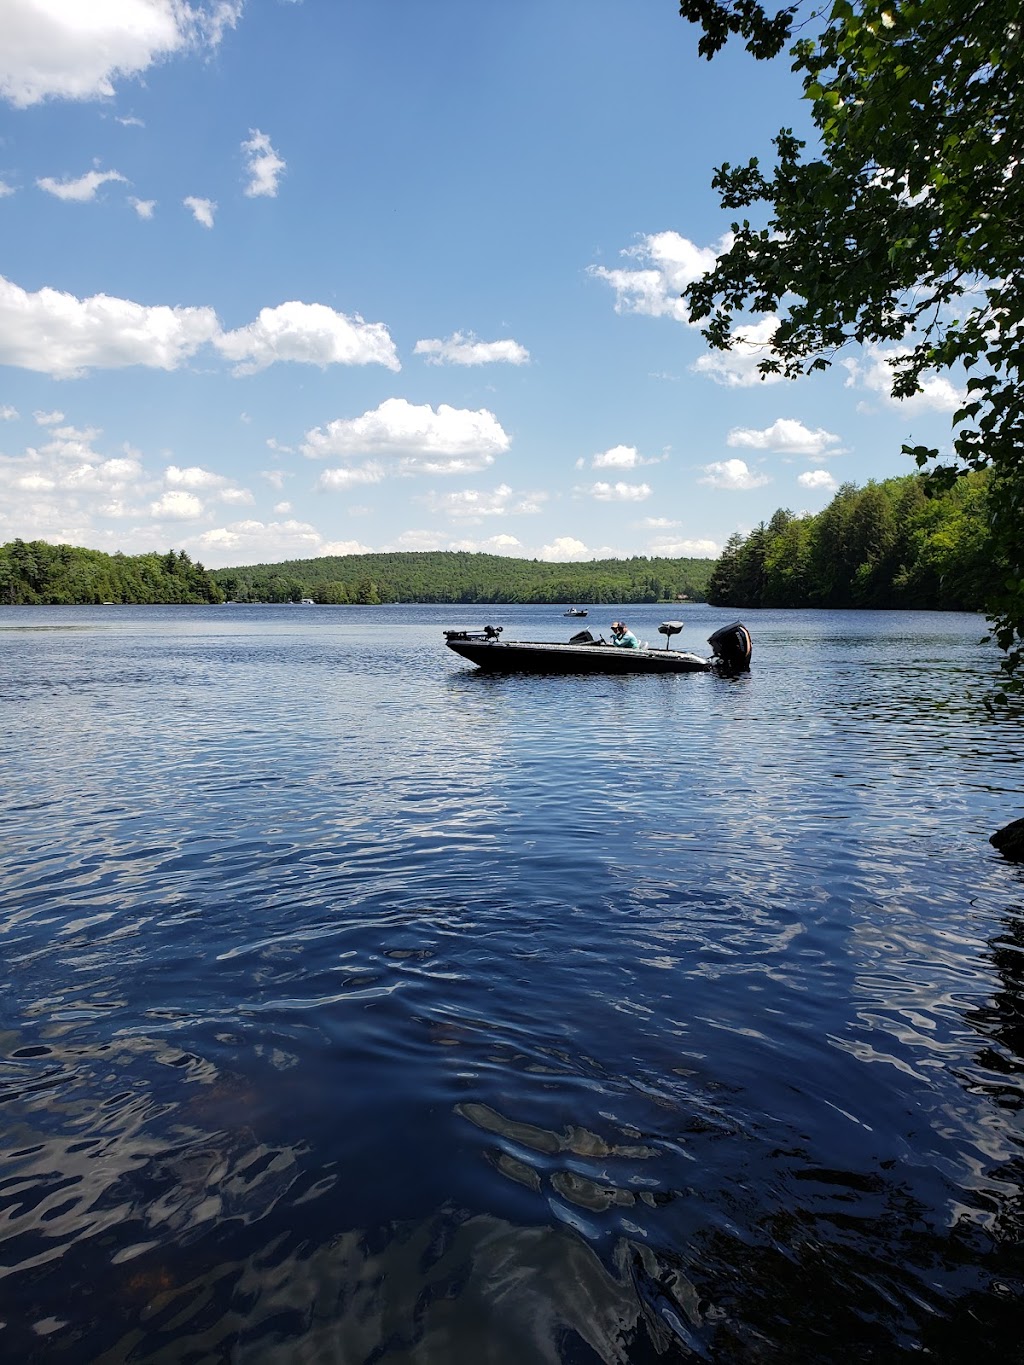 Tolland State Forest | 410 Tolland Rd, East Otis, MA 01029 | Phone: (413) 269-6002